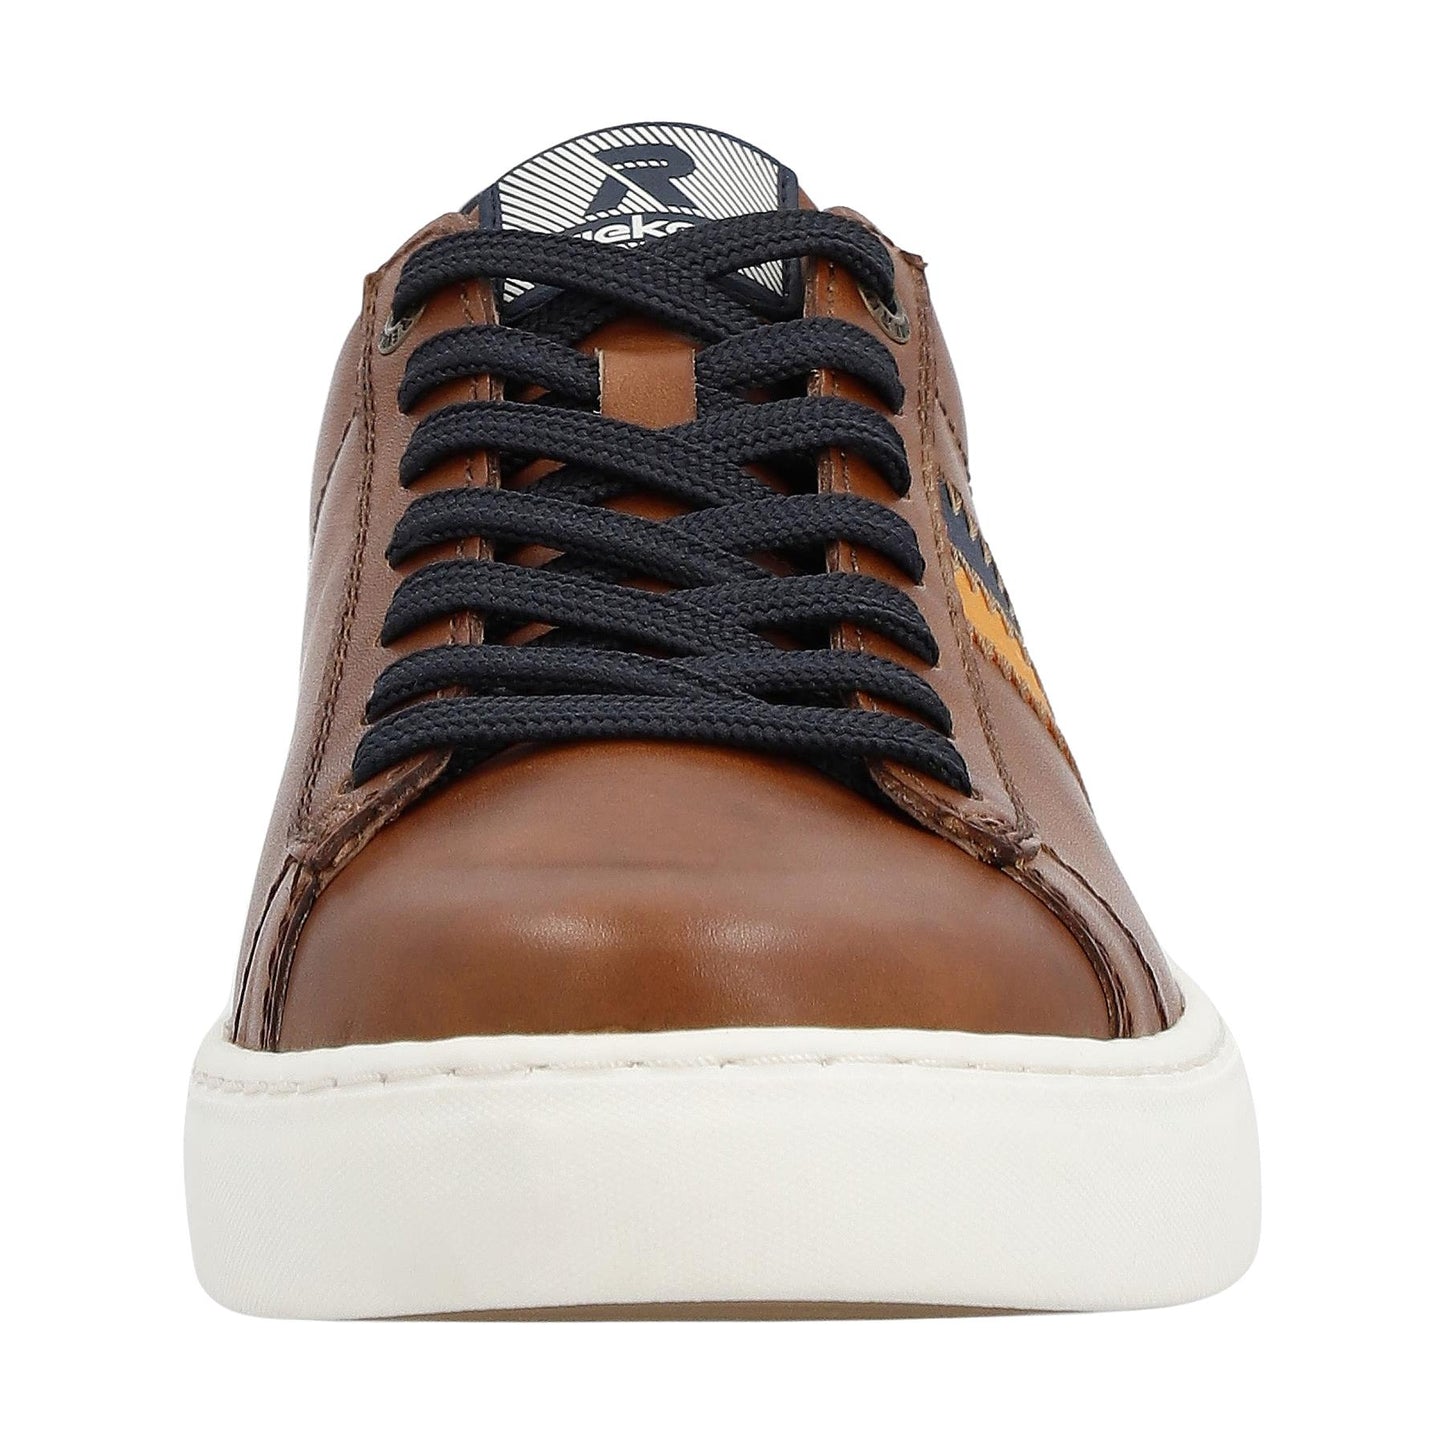 Rieker Mens U0705-24 Brown Leather Lace Up Wide Fit Casual Shoes Trainers